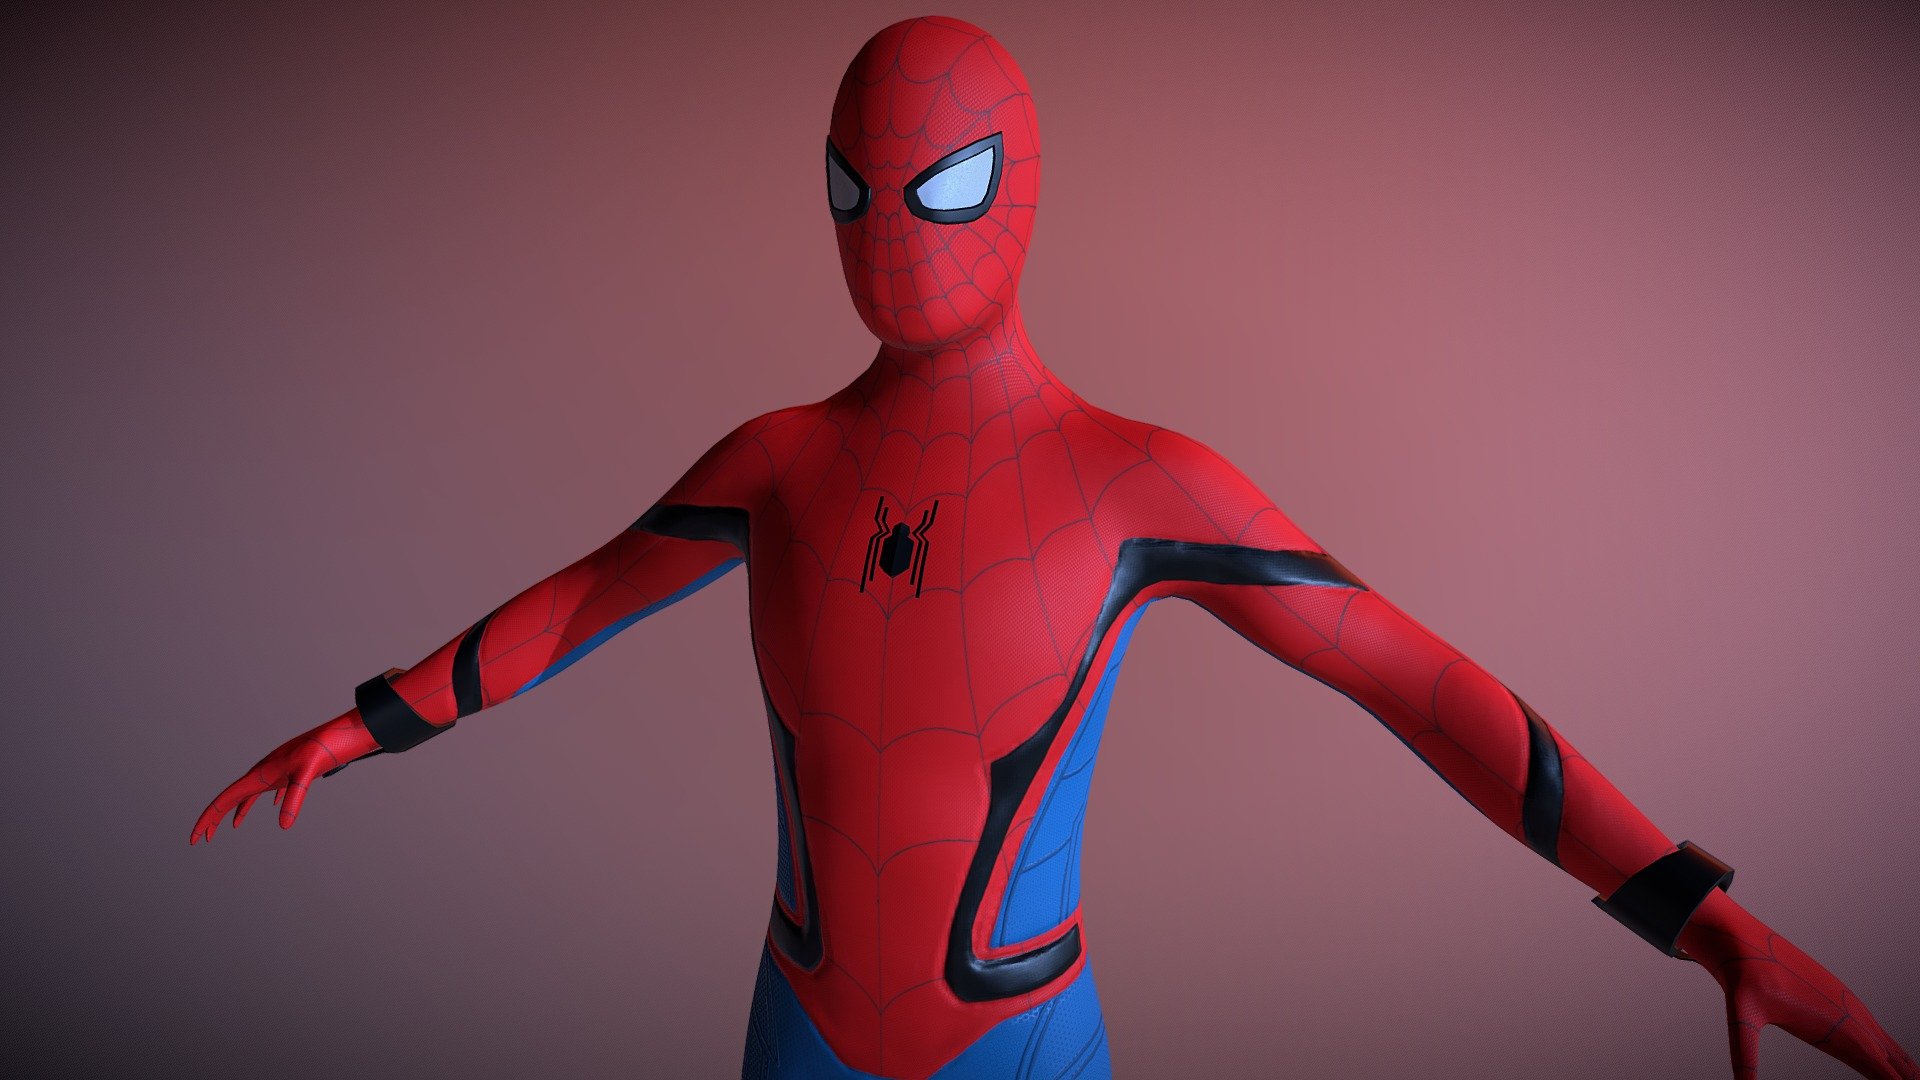 Here is a sculpt I did of Spiderman from Spiderman Homecoming for a uni project.

I sculpted it in Zbrush and textured and baked the model in Substance Painter 3d model